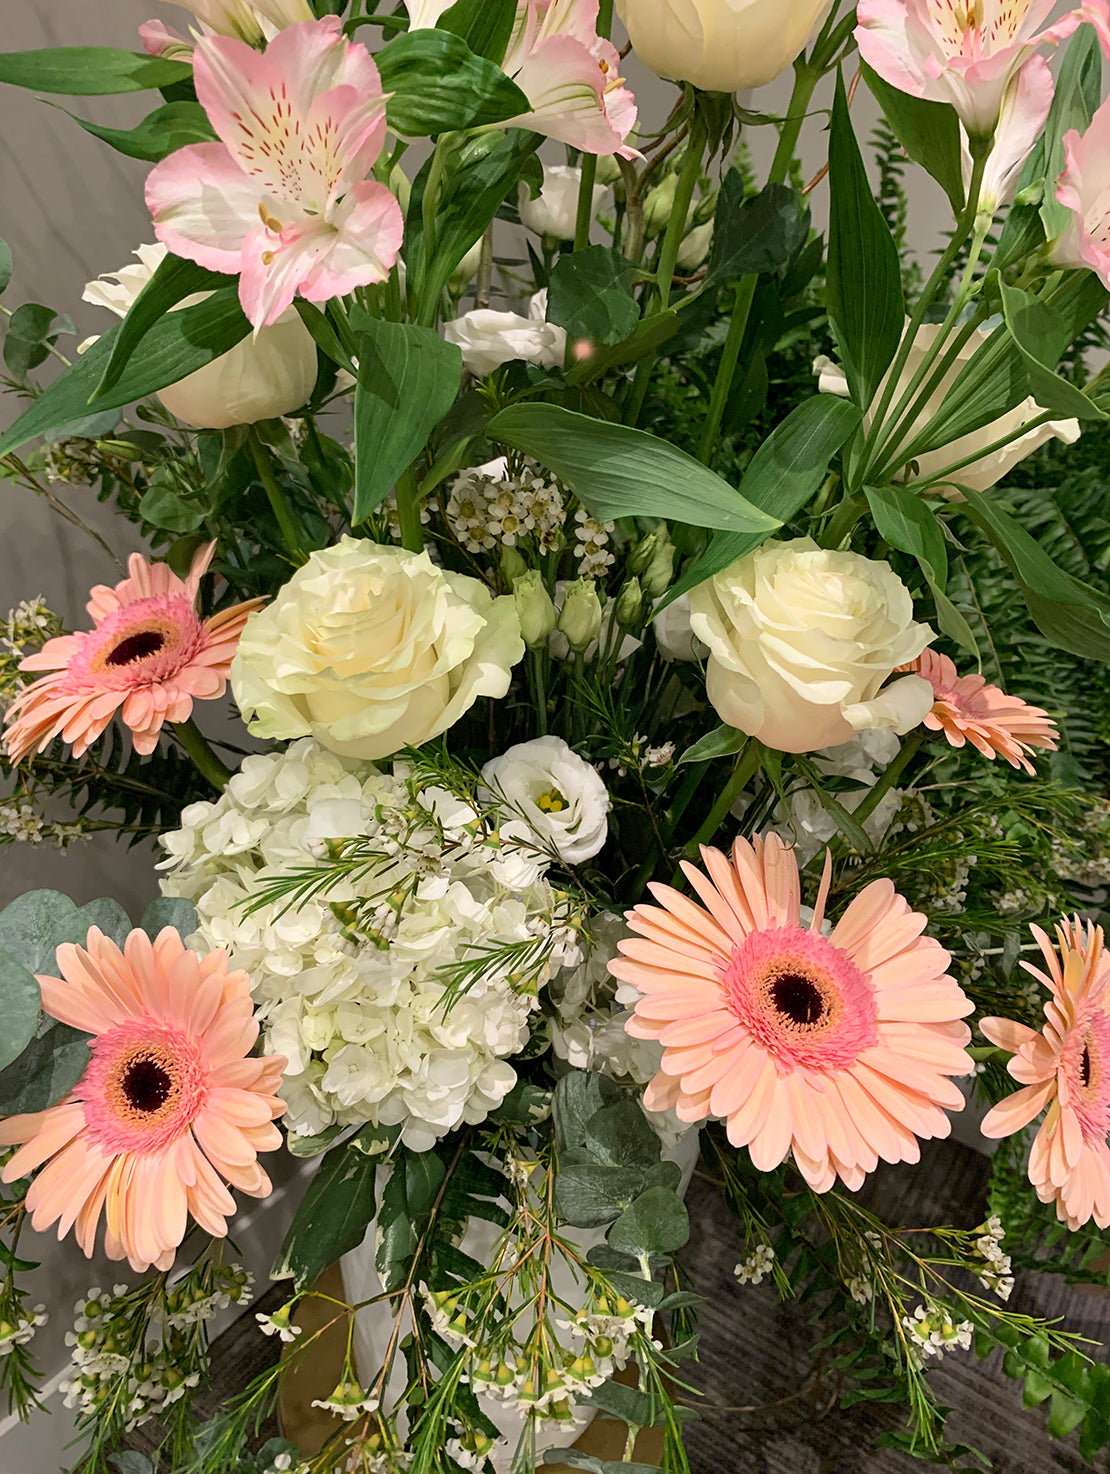 Funeral flowers filled with love